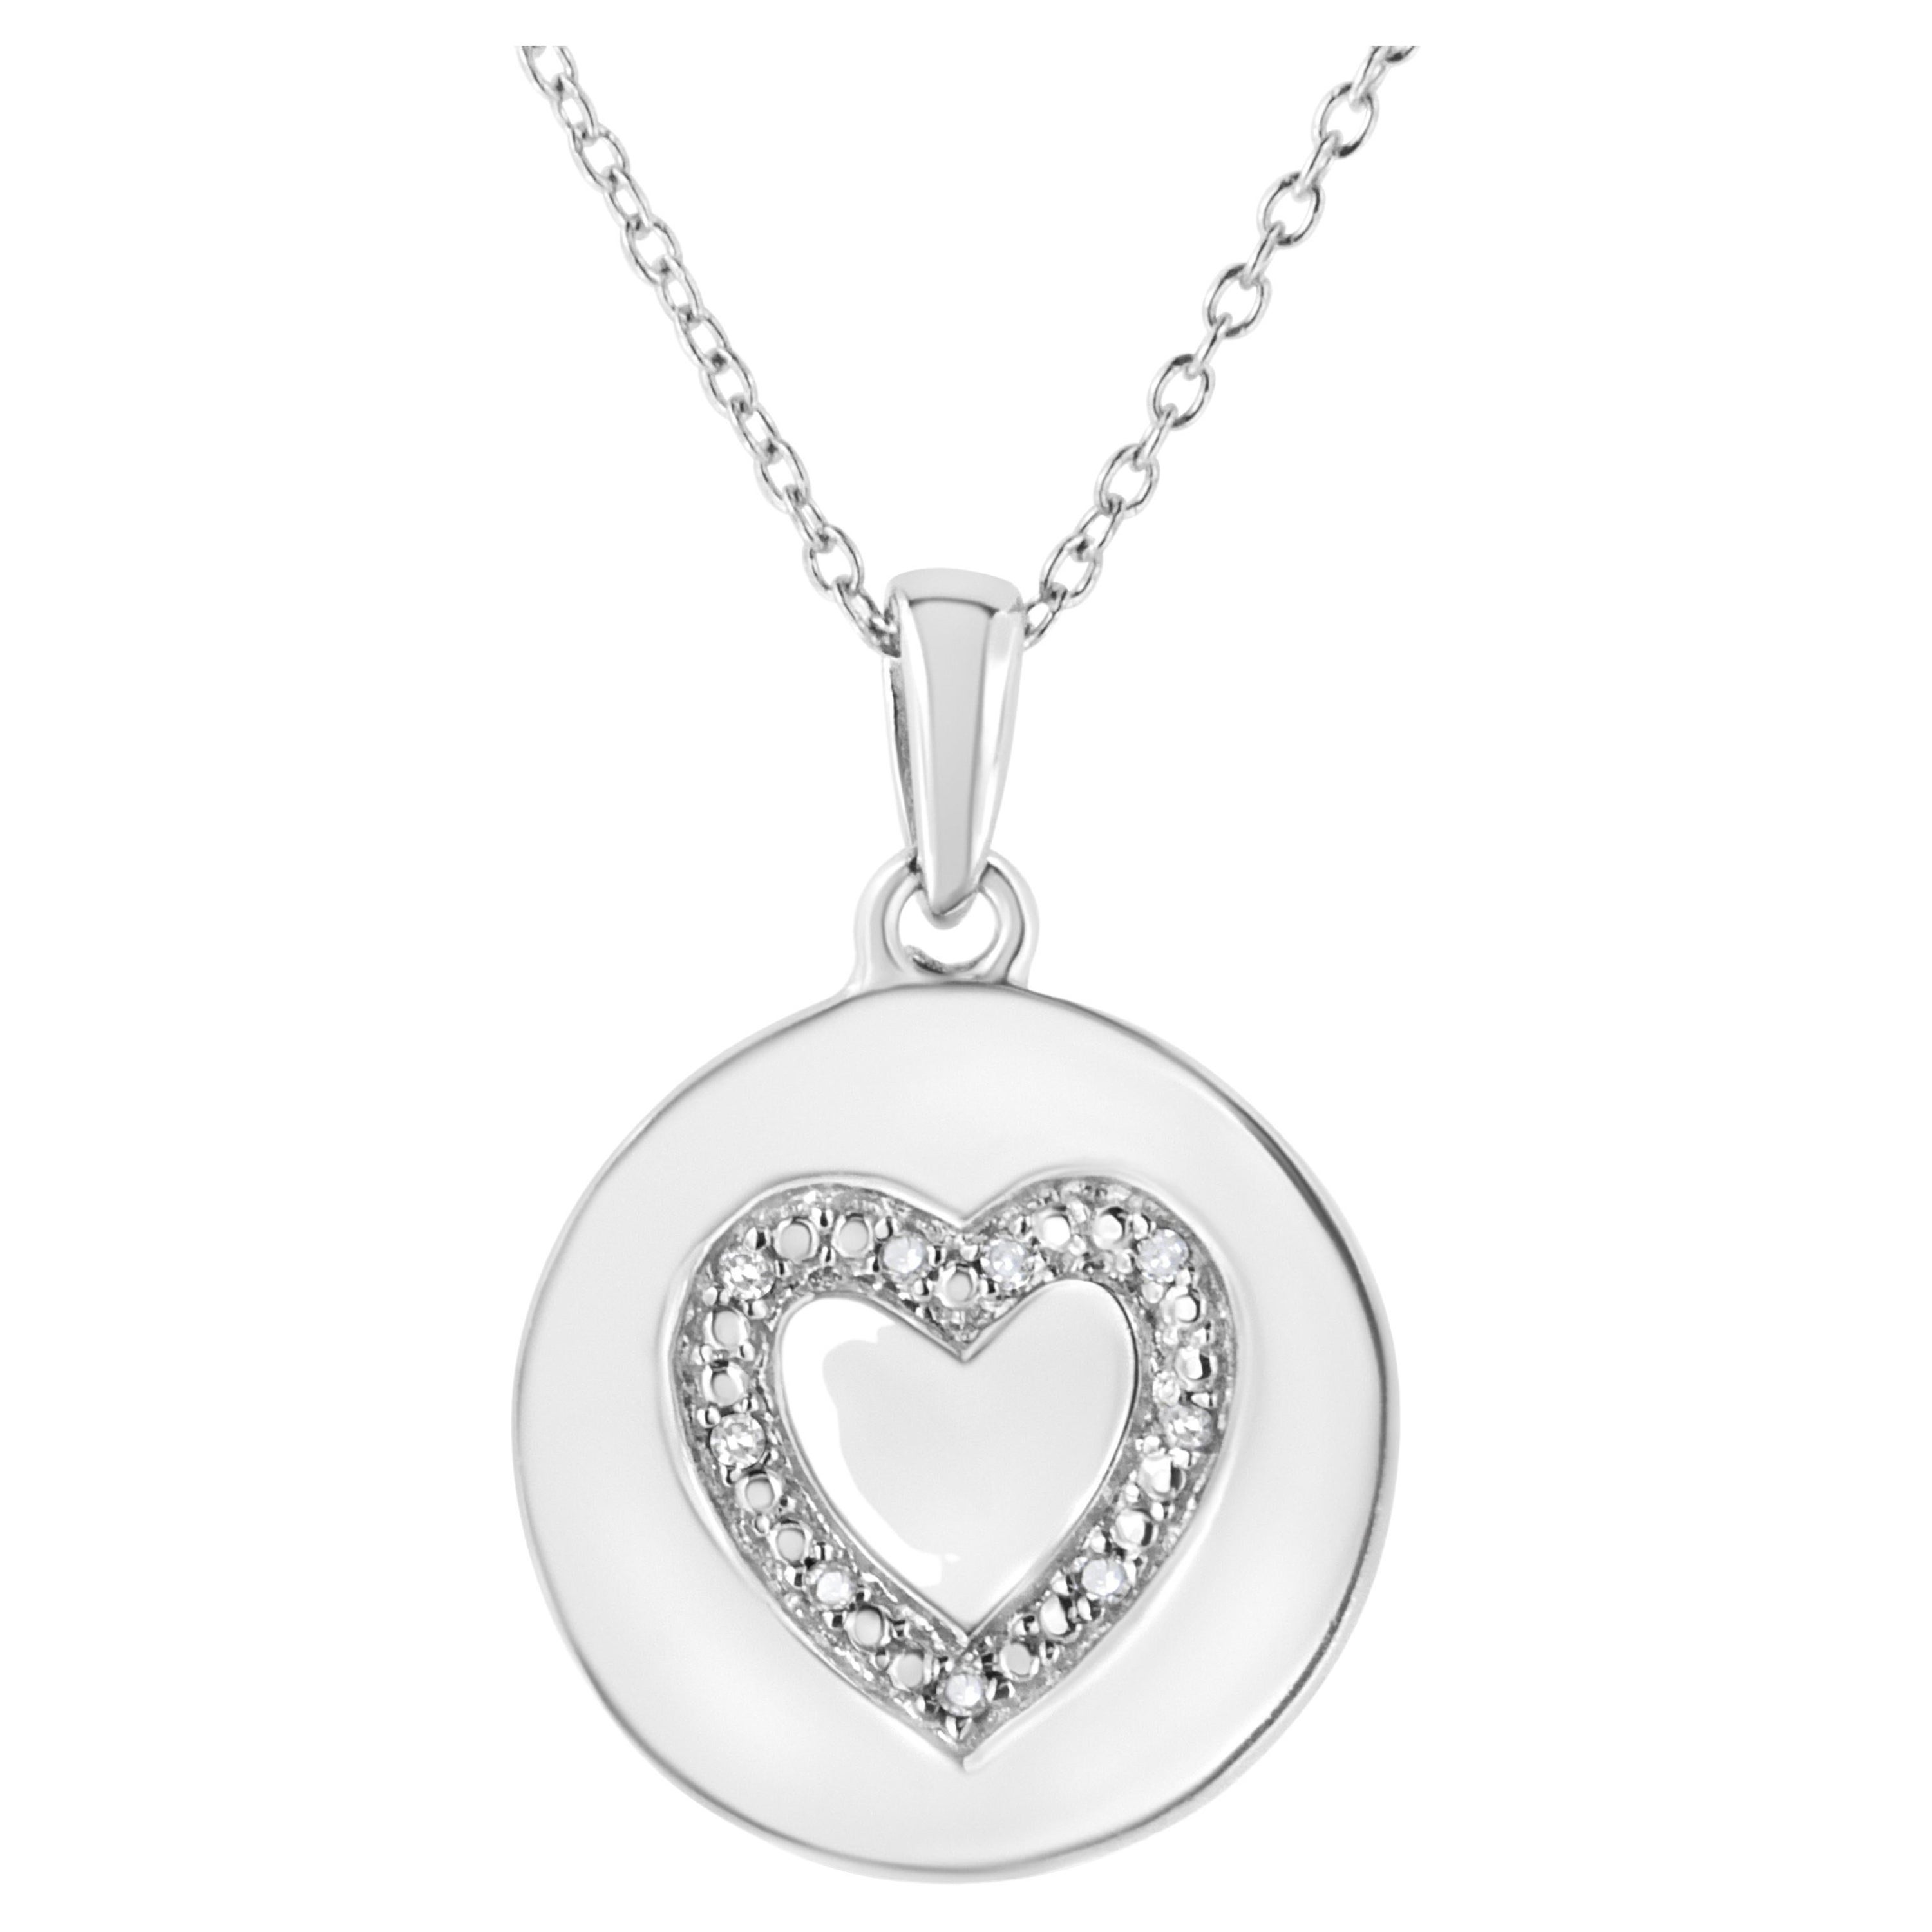 .925 Sterling Silver Prong-Set Diamond Accent Heart Emblemed Pendant Necklace